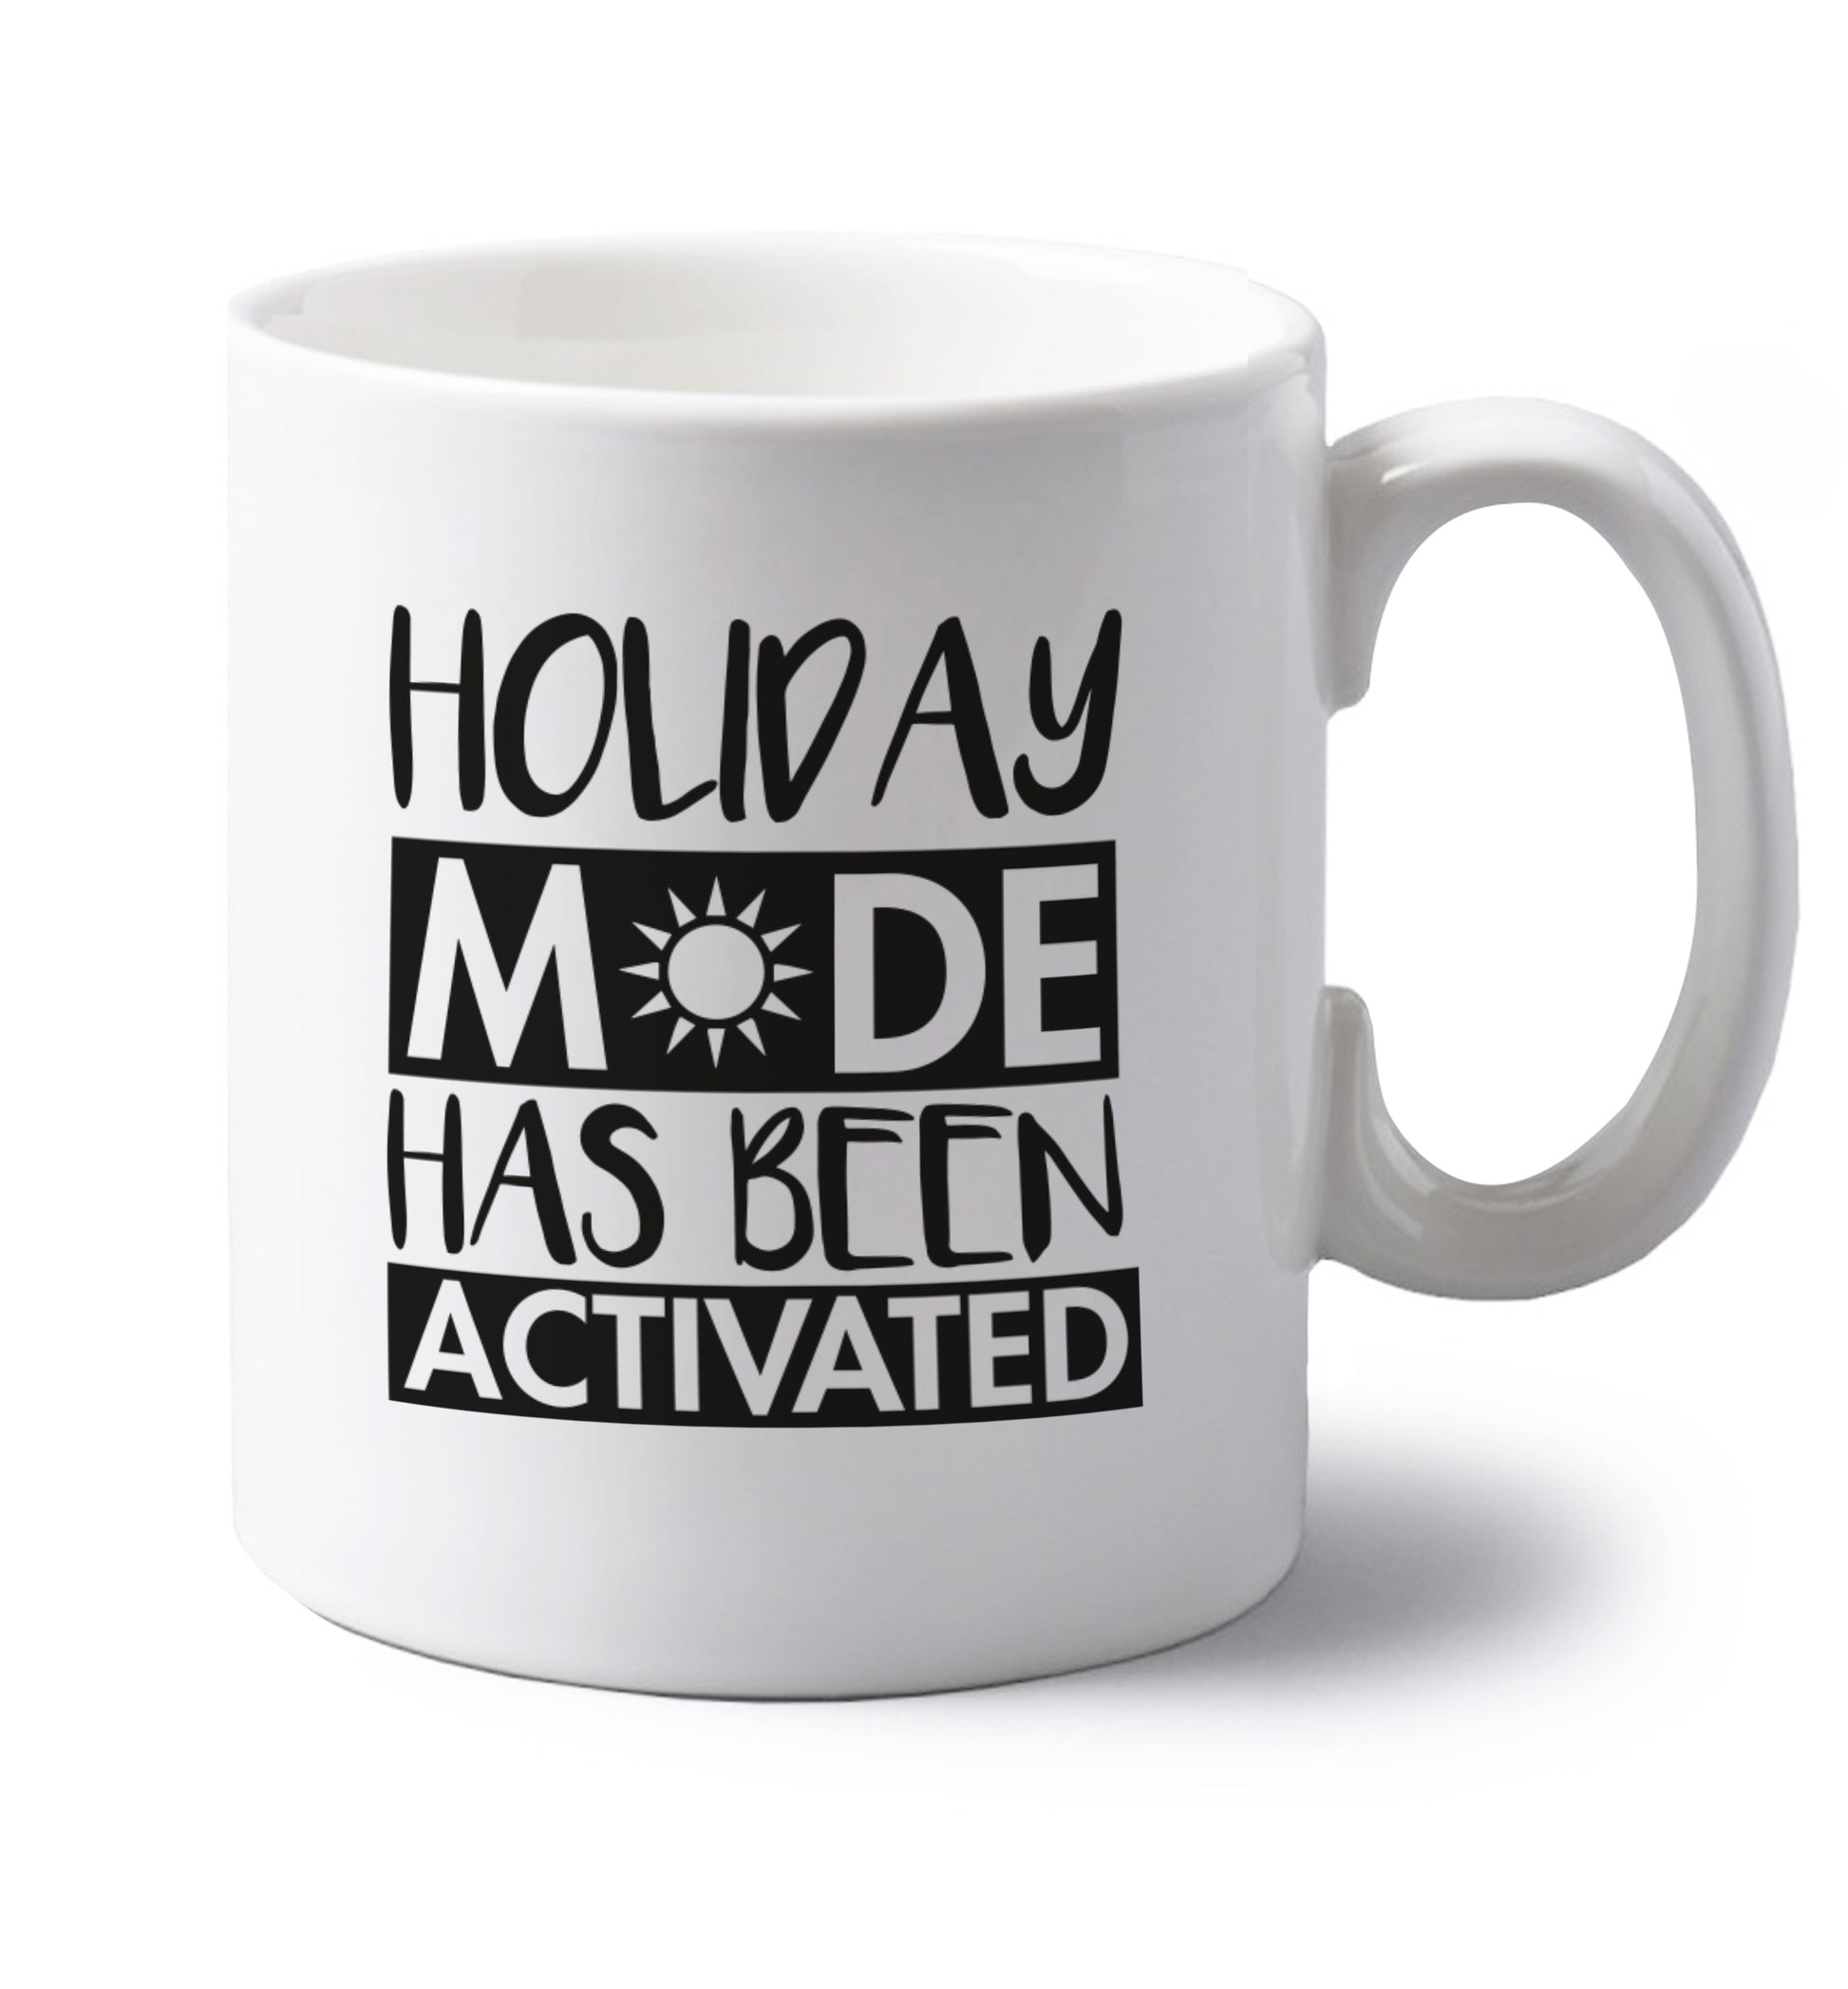 Holiday mode has been activated left handed white ceramic mug 